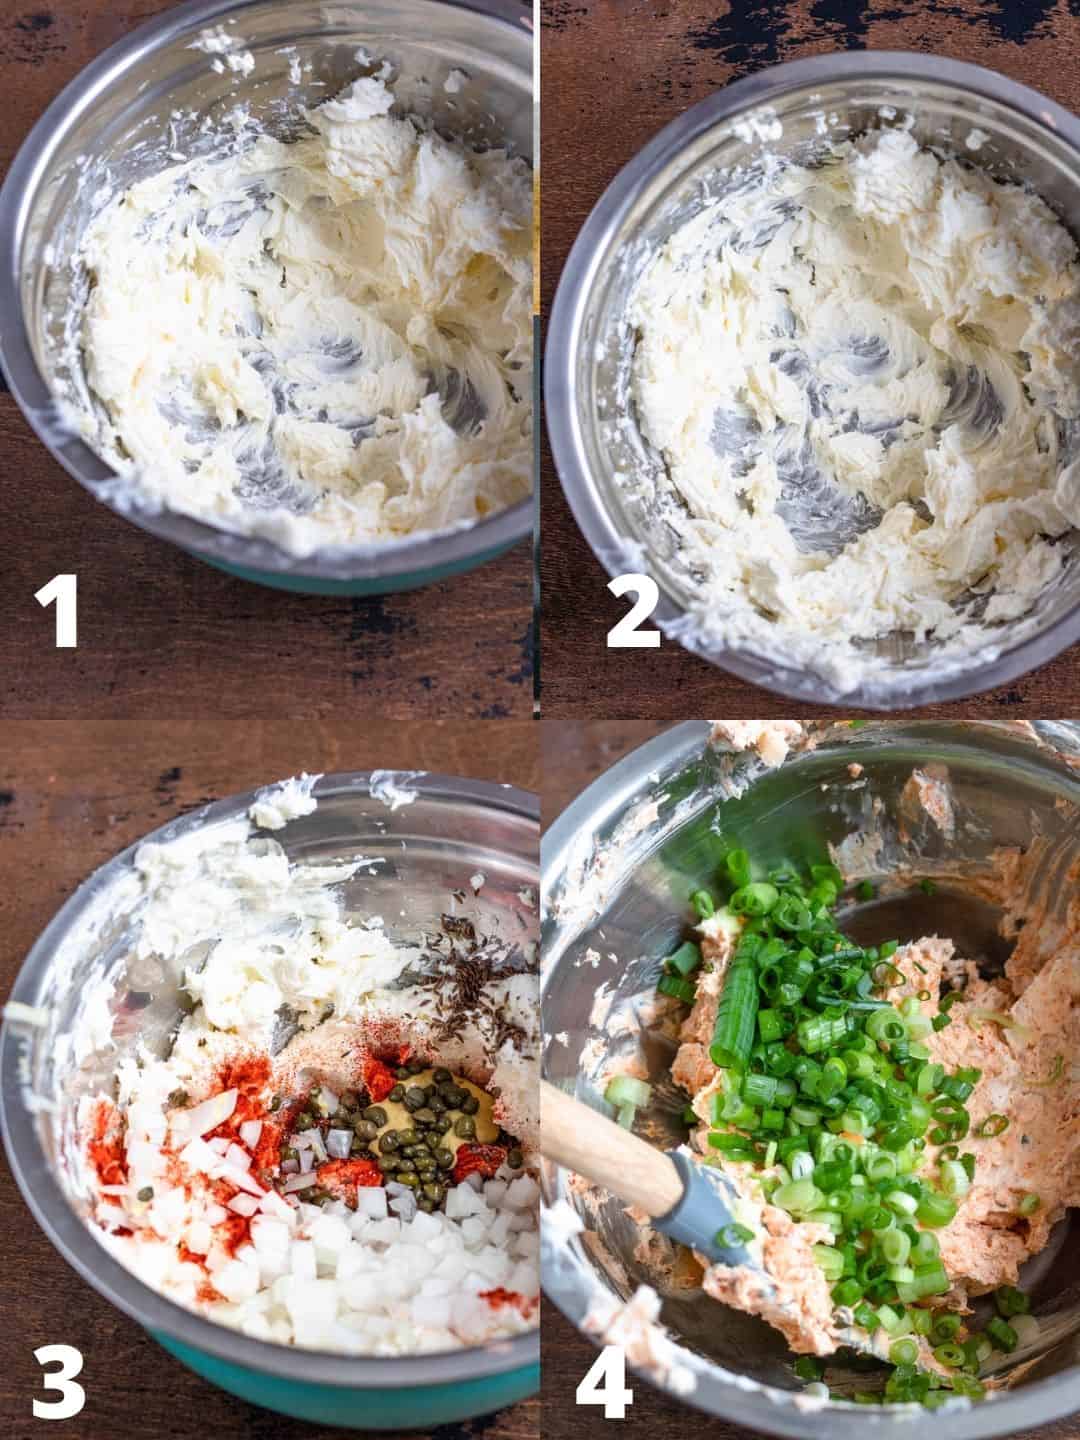 Labeled process shots showing the four steps to making liptauer, including mixing the ingredients, adding spices, and mixing in green onions. 